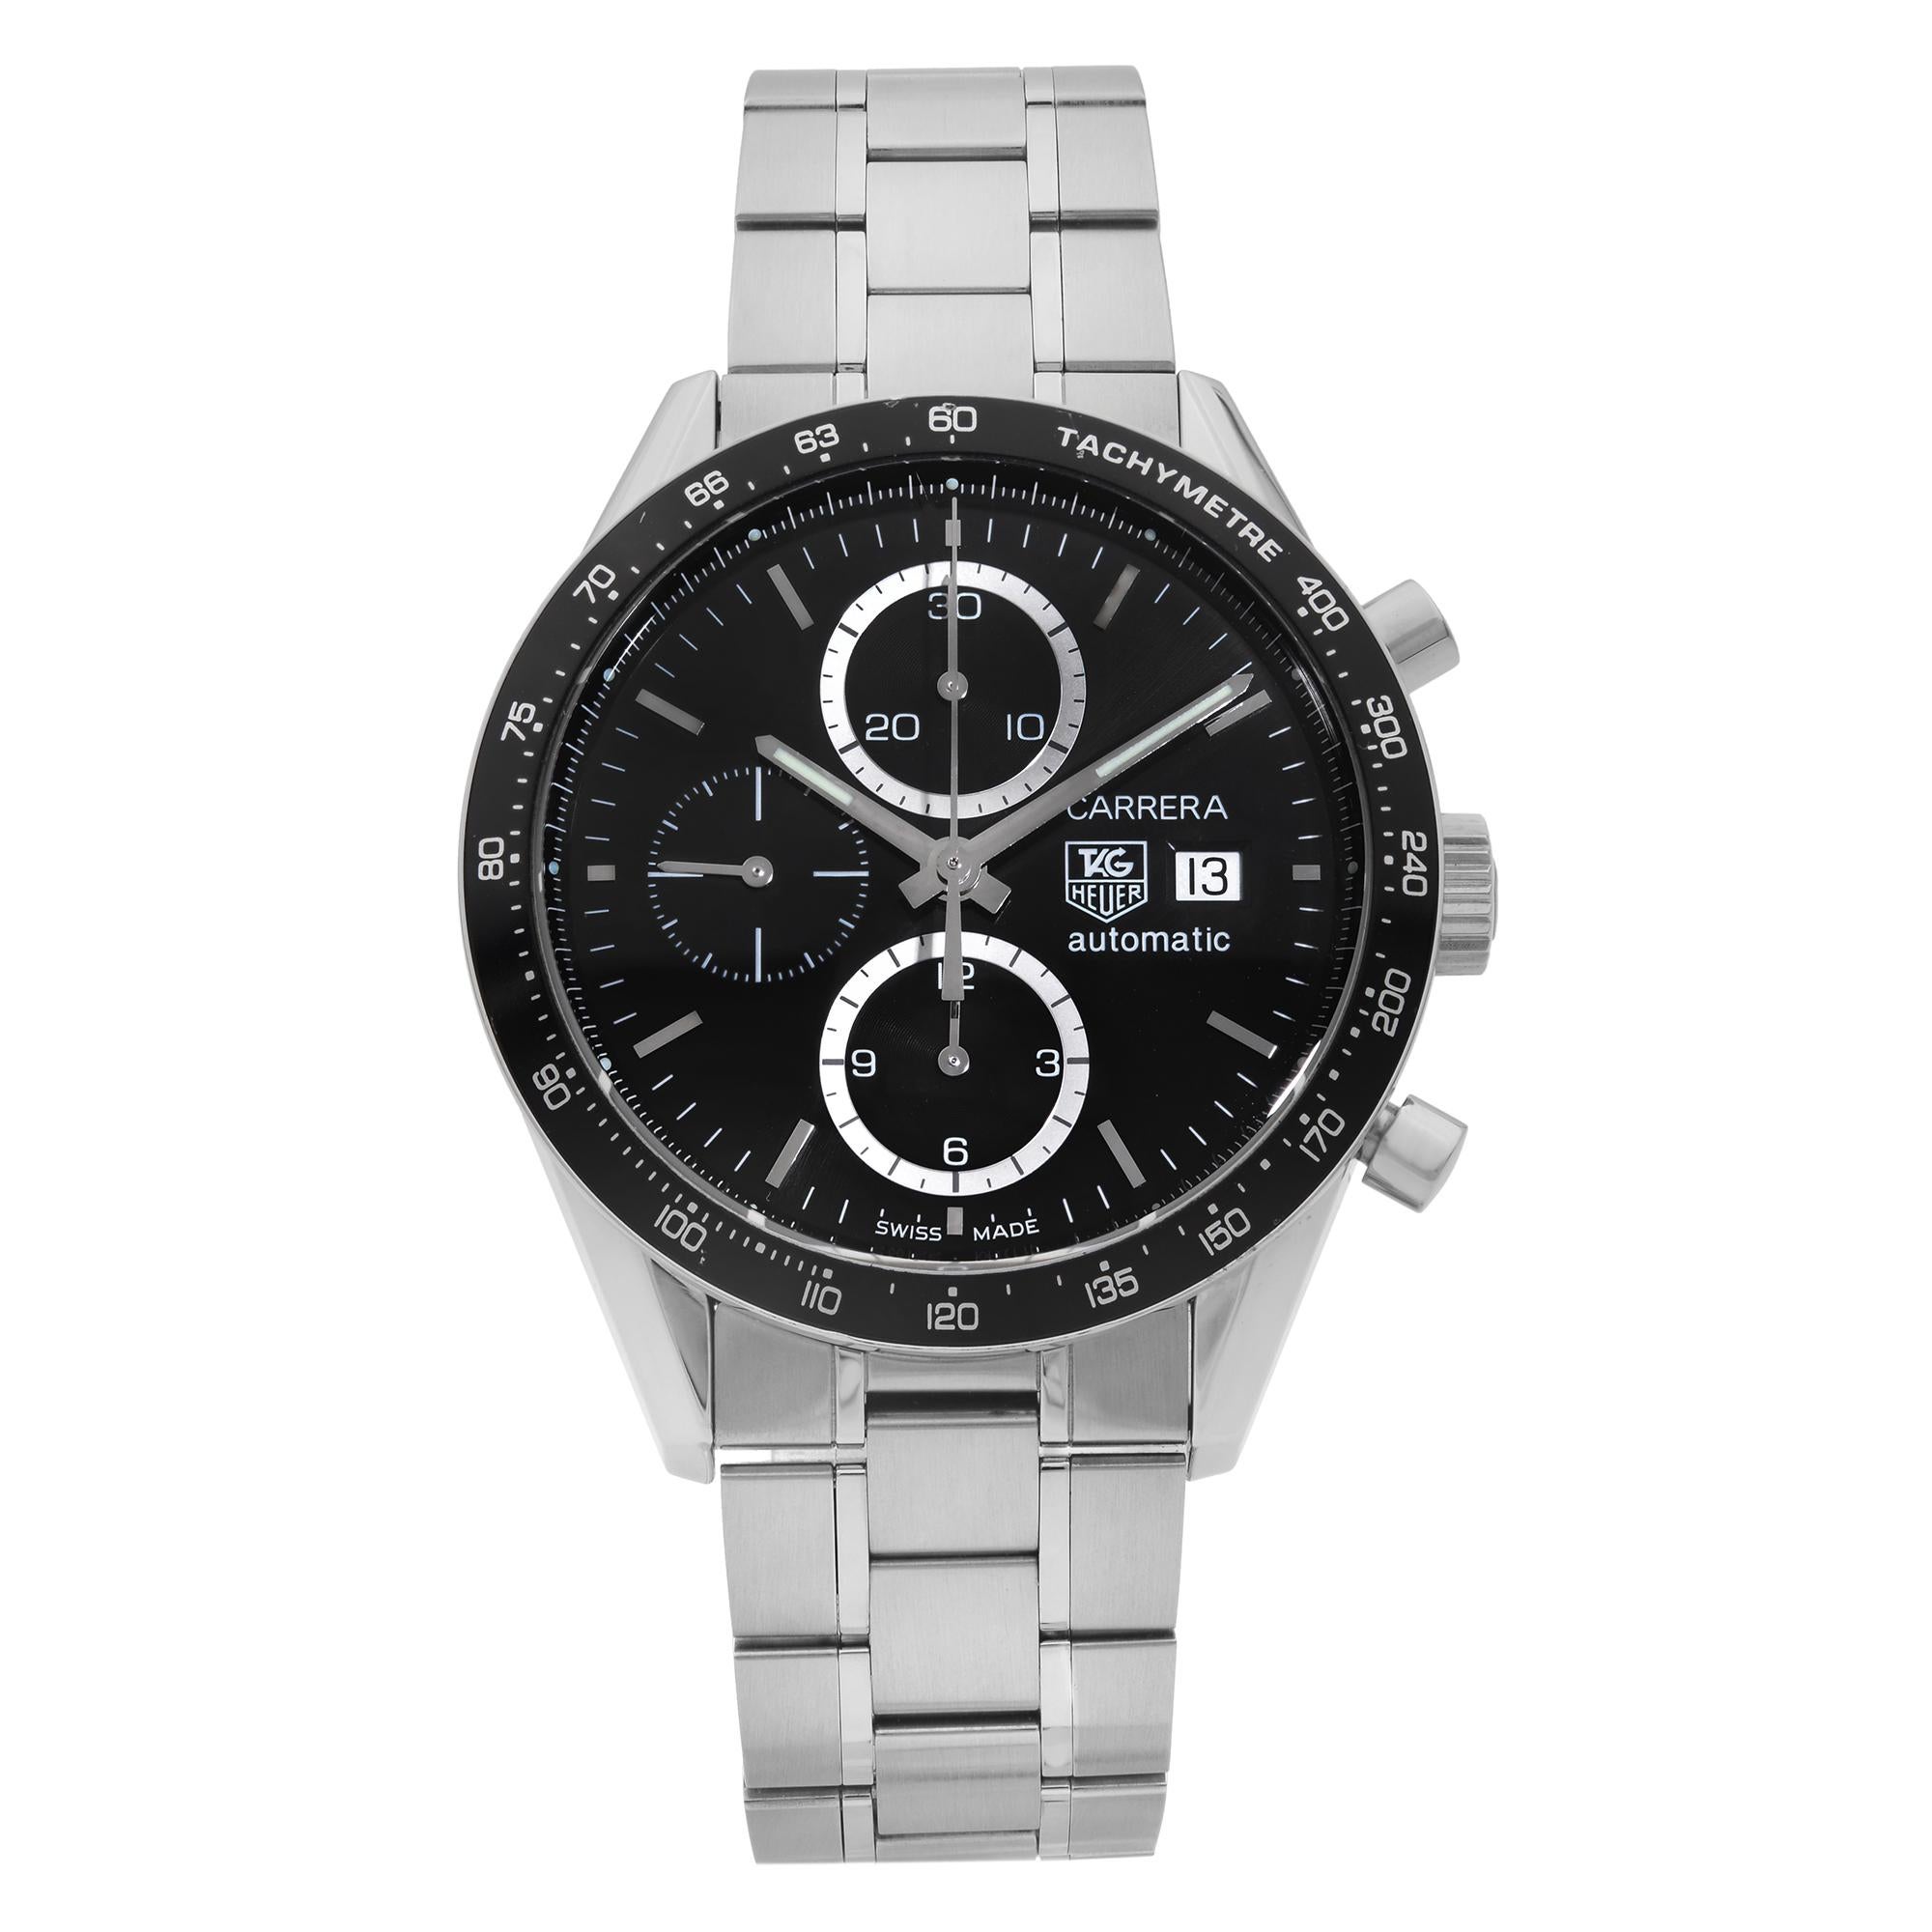 This pre-owned TAG Heuer Carrera CV2010-4 is a beautiful men's timepiece that is powered by mechanical (automatic) movement which is cased in a stainless steel case. It has a round shape face, chronograph, date indicator, small seconds subdial dial